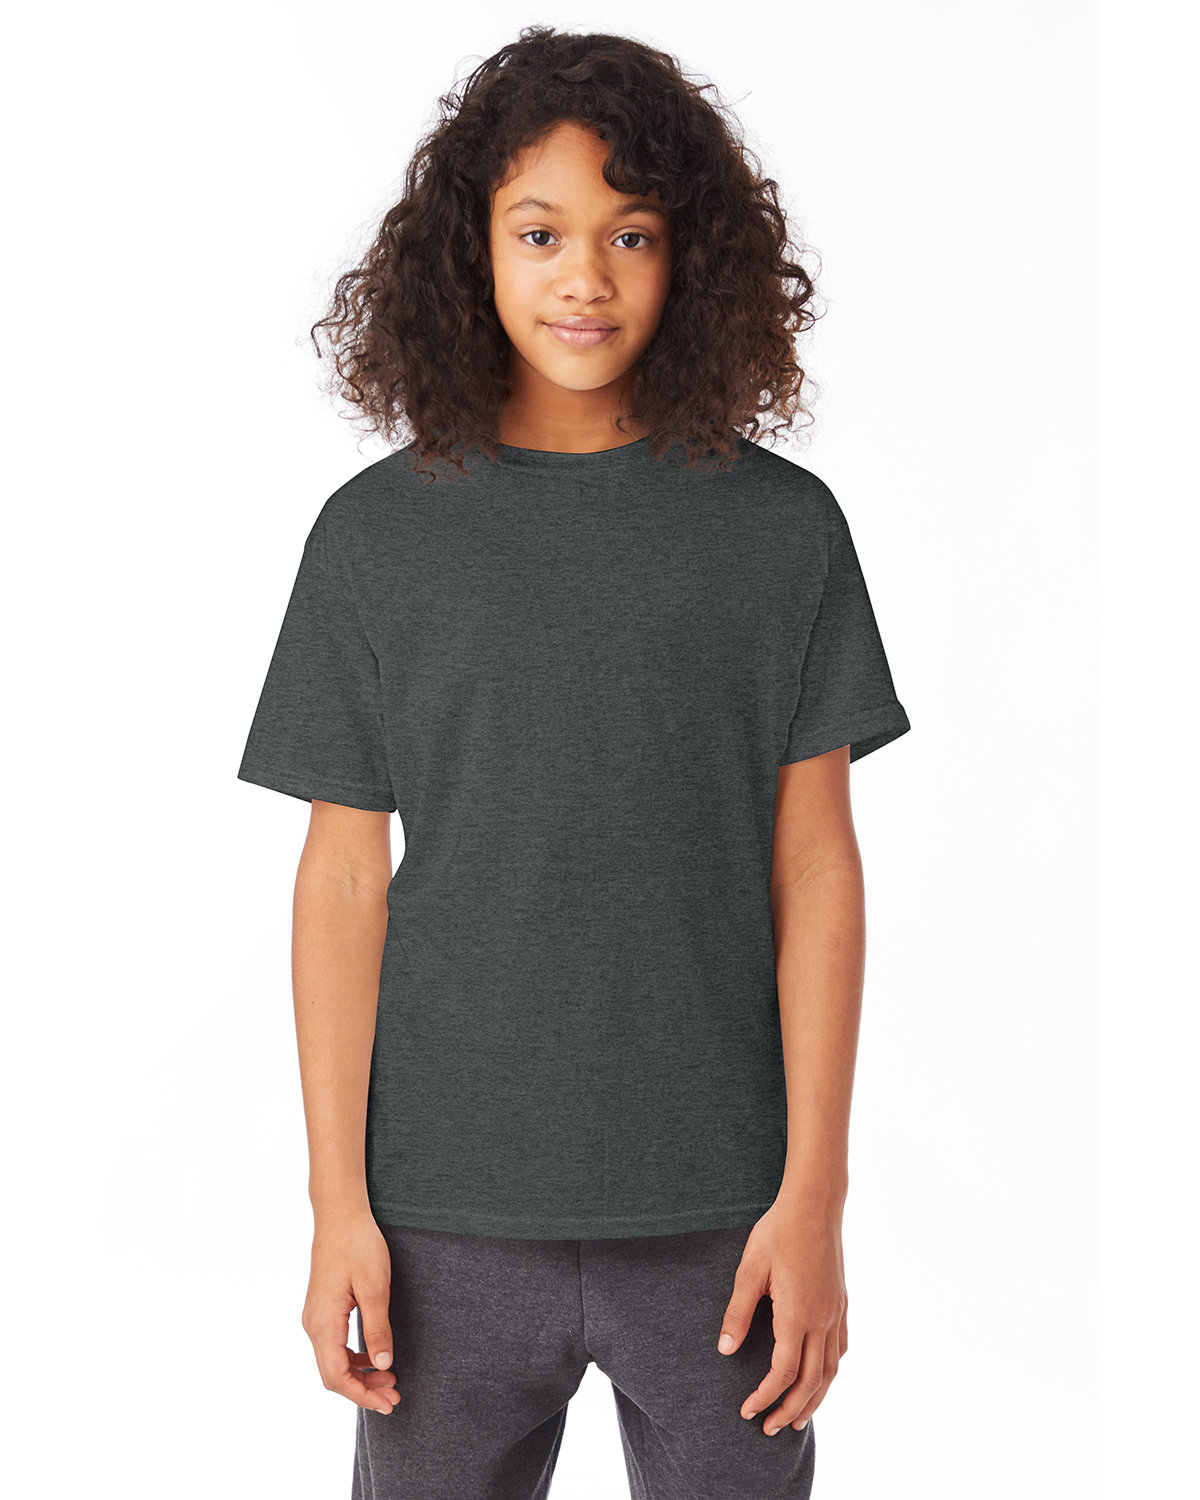 Hanes Youth 50/50 T-Shirt CHARCOAL HEATHER 